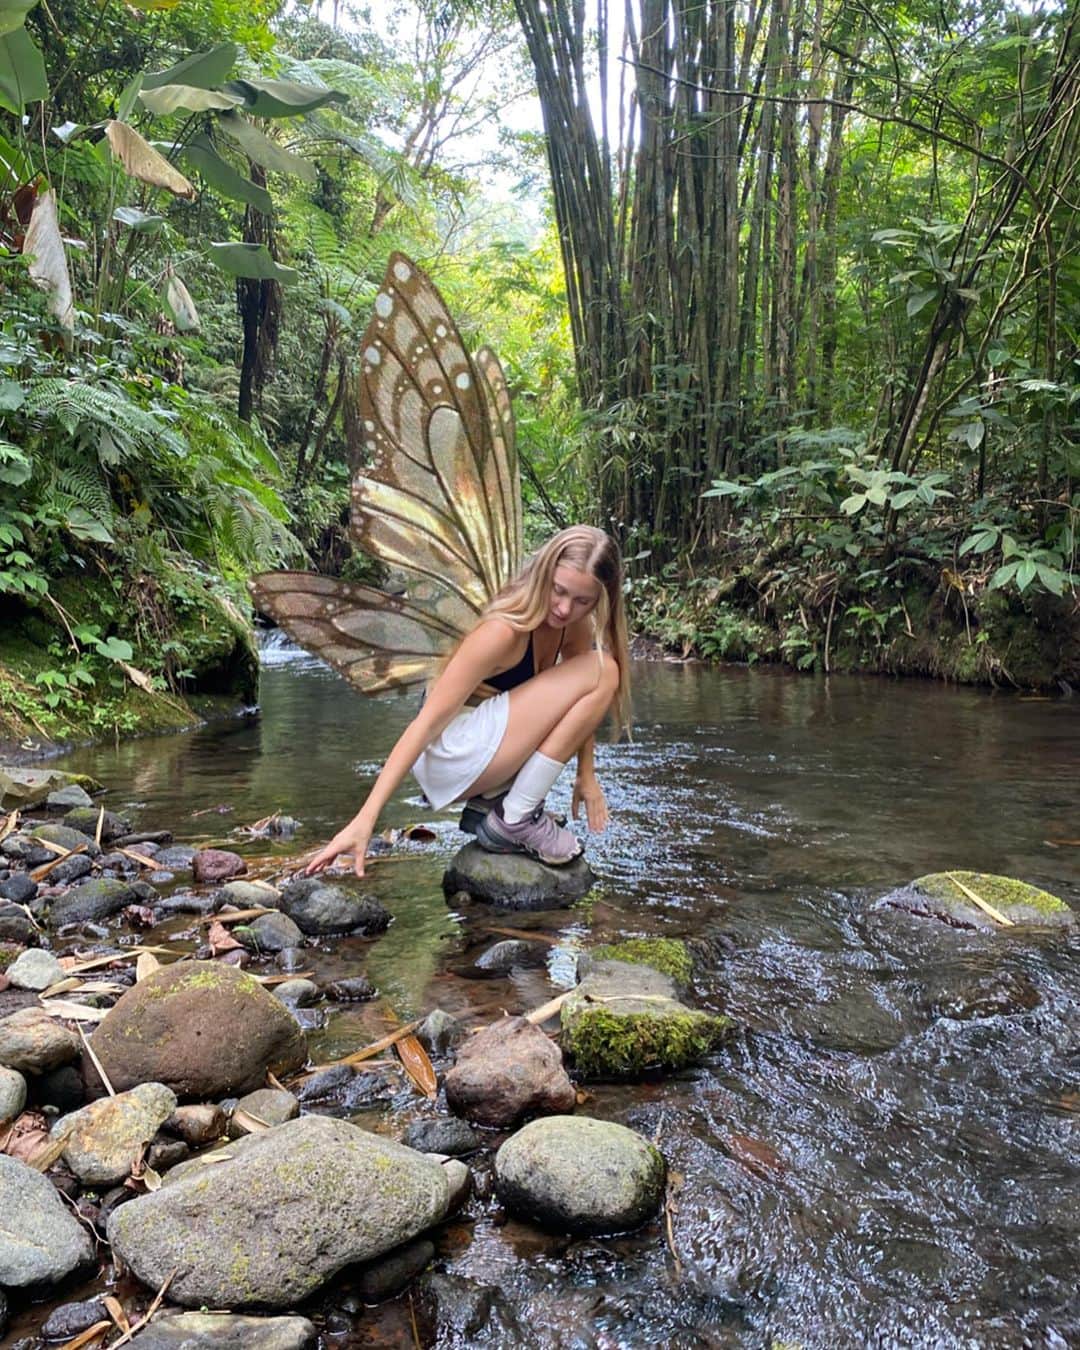 Dara Muscatのインスタグラム：「In my forest fairy era ✨🌳🍃🌿🧚🏼‍♀️✨ Everyday we wait for the rain to start, been missing it so much and can’t wait for my journey to misty forests of Kansai’ fall next week 🍂」